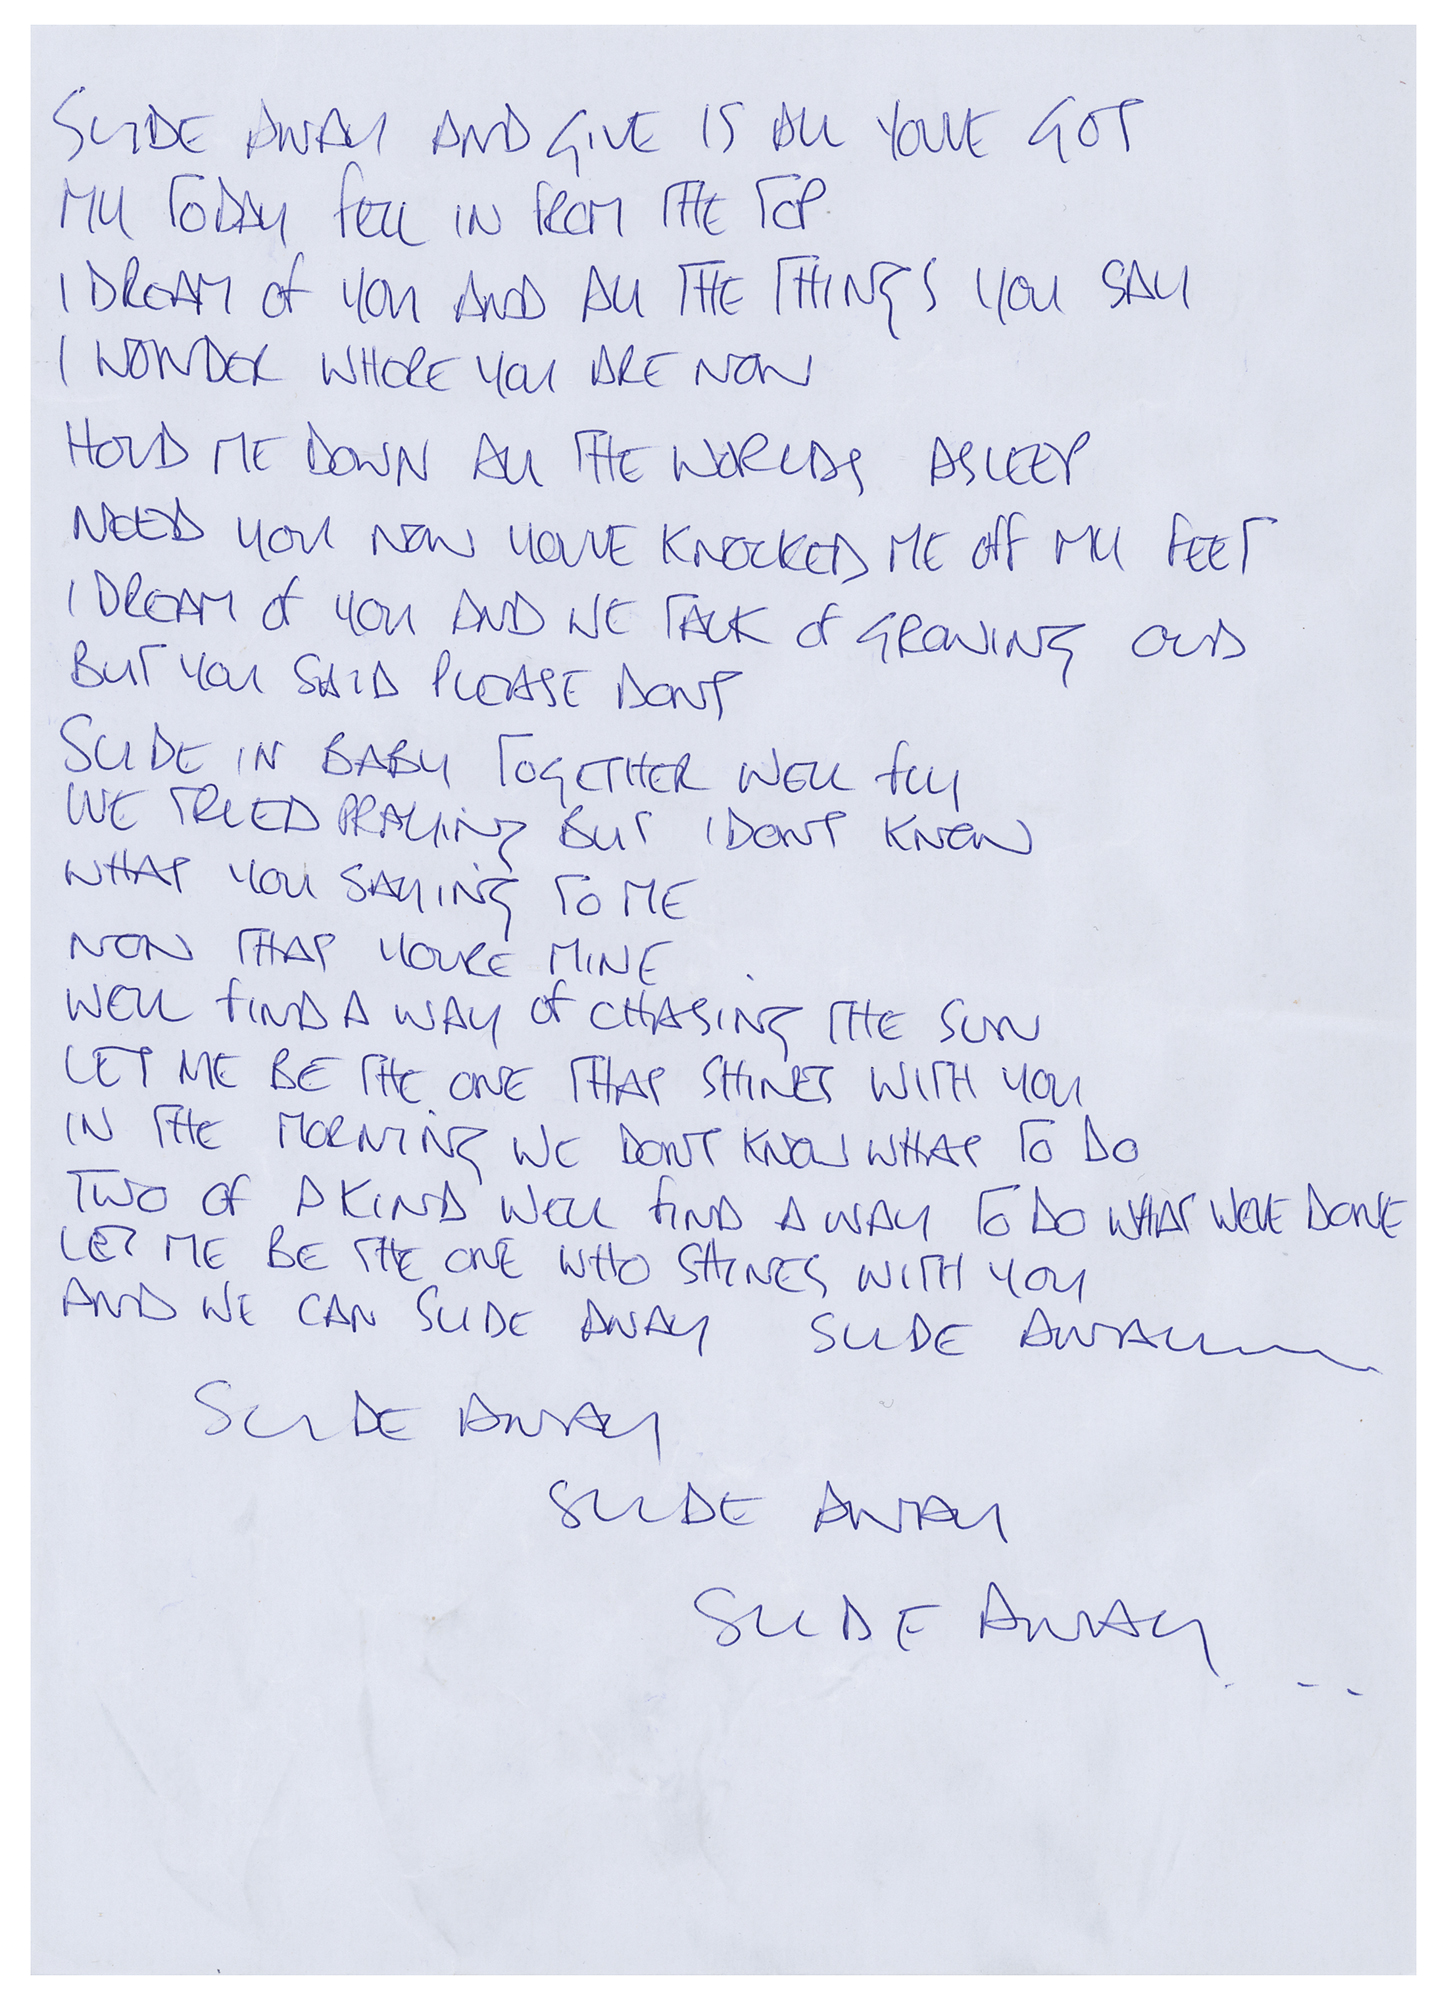 Lot #628 Oasis: Noel Gallagher Handwritten Lyrics (13) for Definitely Maybe, with CD Signed by the Gallagher Brothers - Image 3